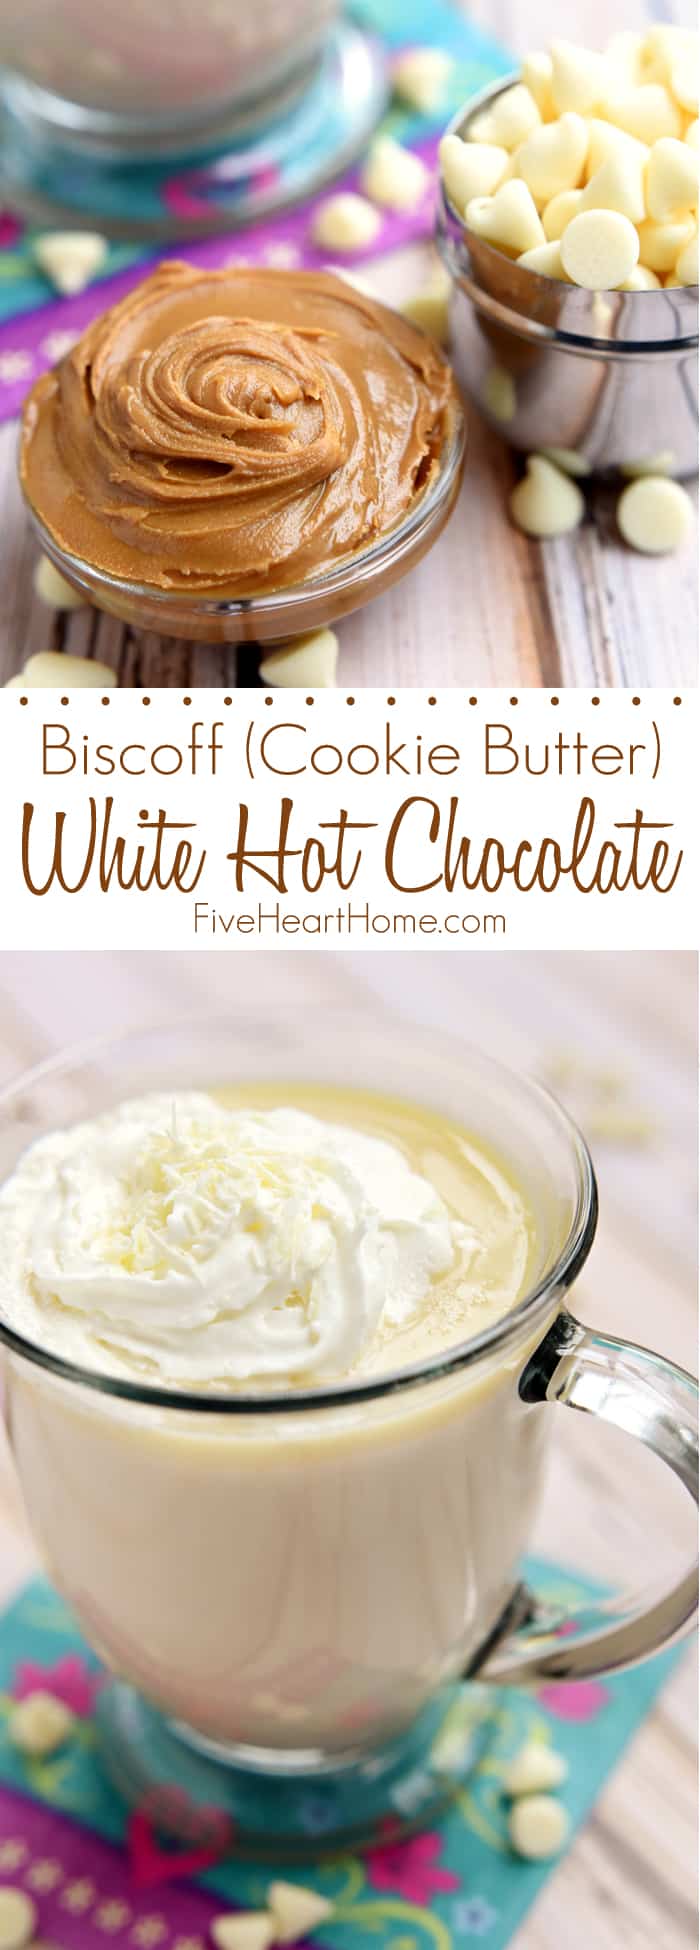 Cookie Butter White Hot Chocolate Collage with Text Overlay 